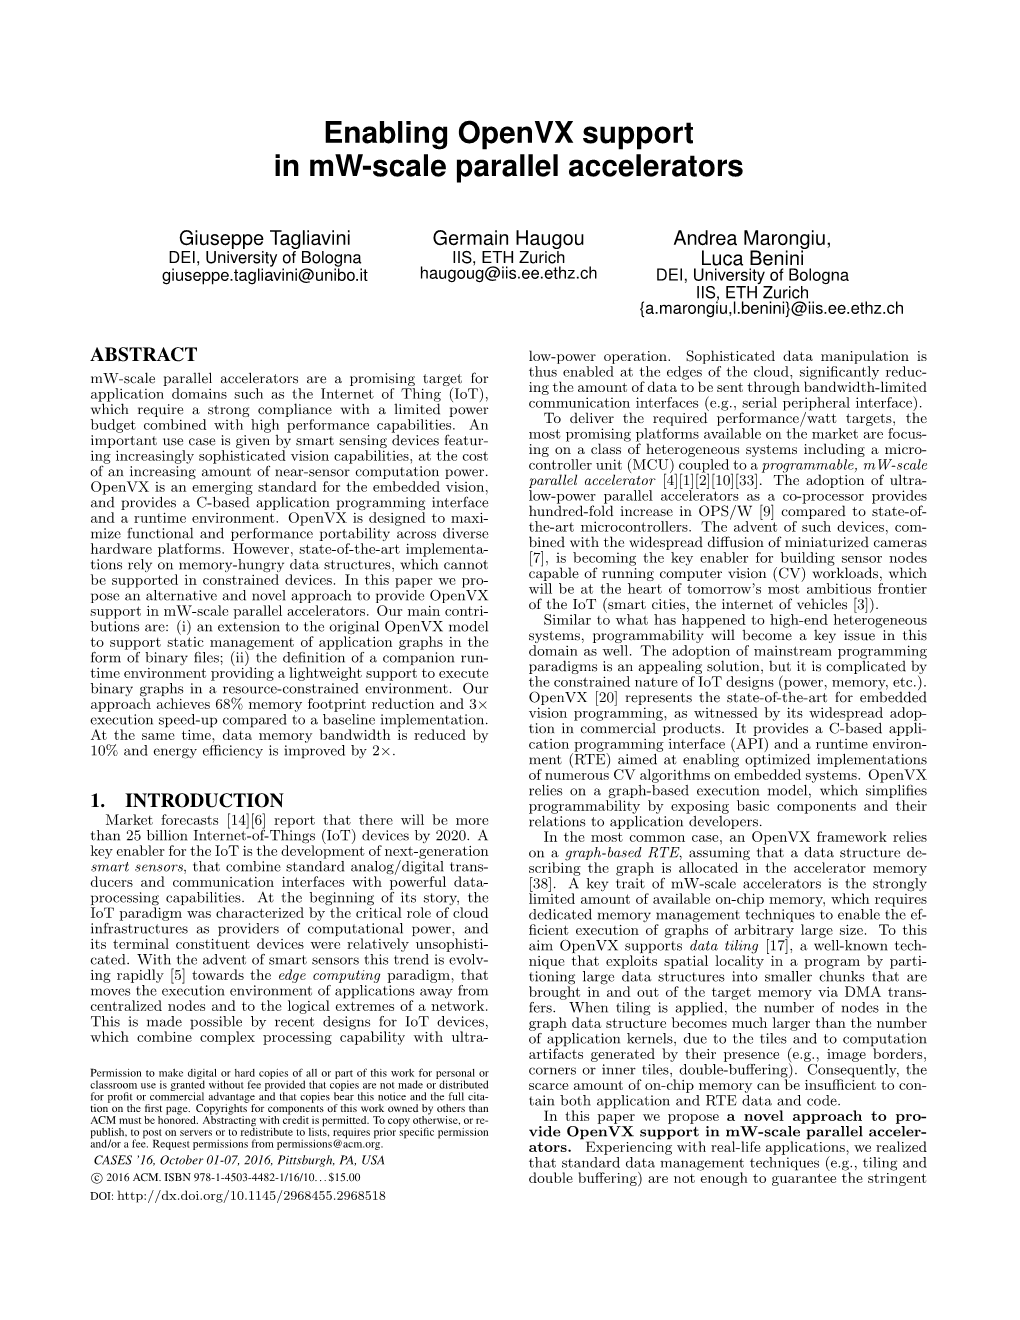 Enabling Openvx Support in Mw-Scale Parallel Accelerators